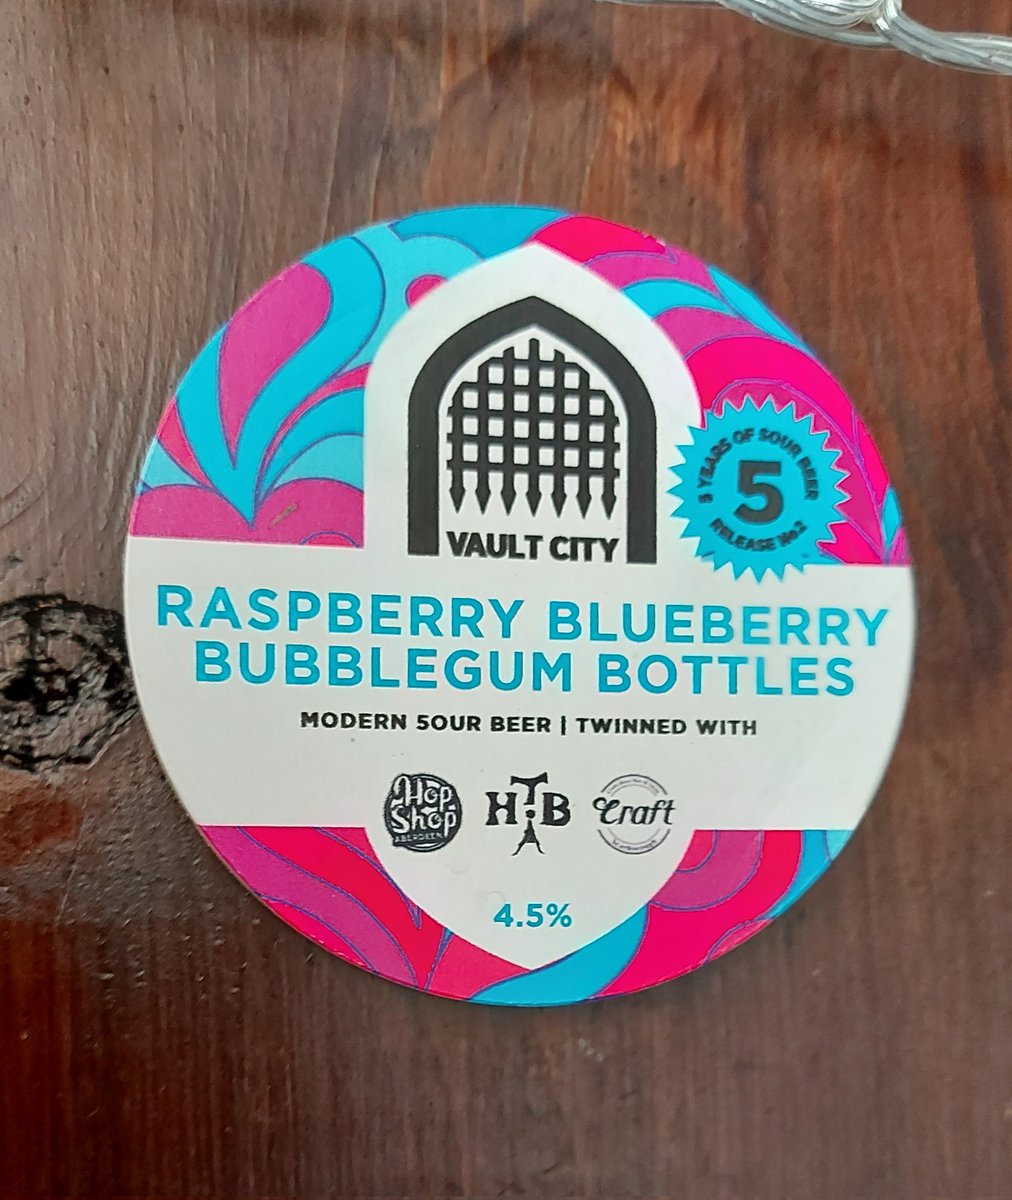 In The Bear for this lovely stuff .... It's not really sour, but getting bubblegum taste @vaultcitybrew #sheffield